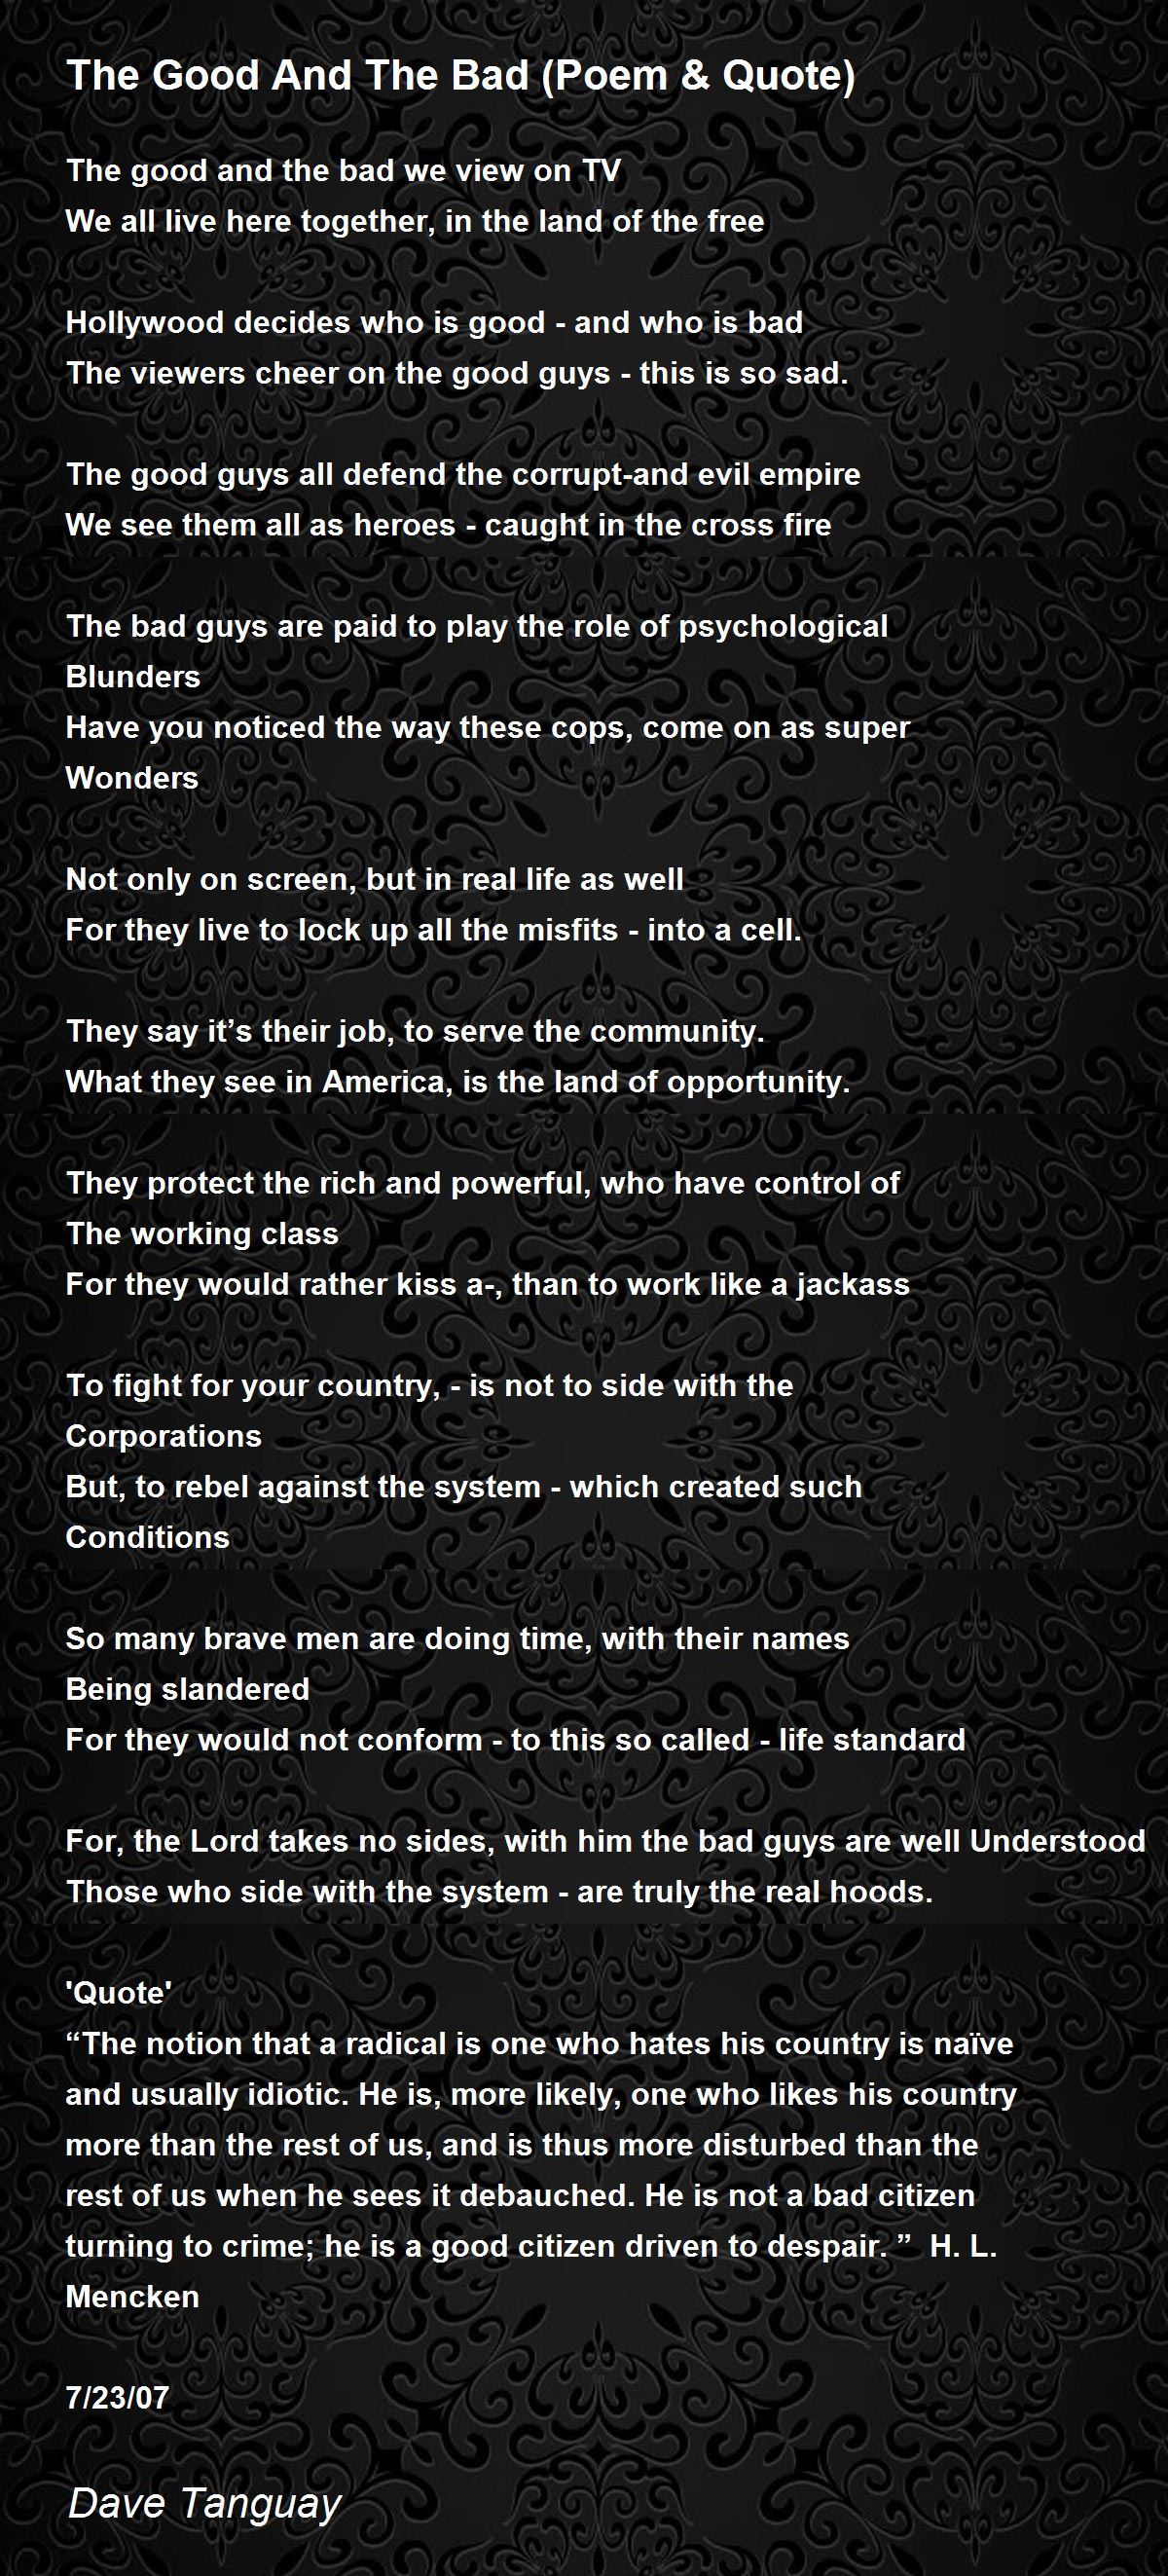 The Good And The Bad (Poem & Quote) - The Good And The Bad (Poem ...